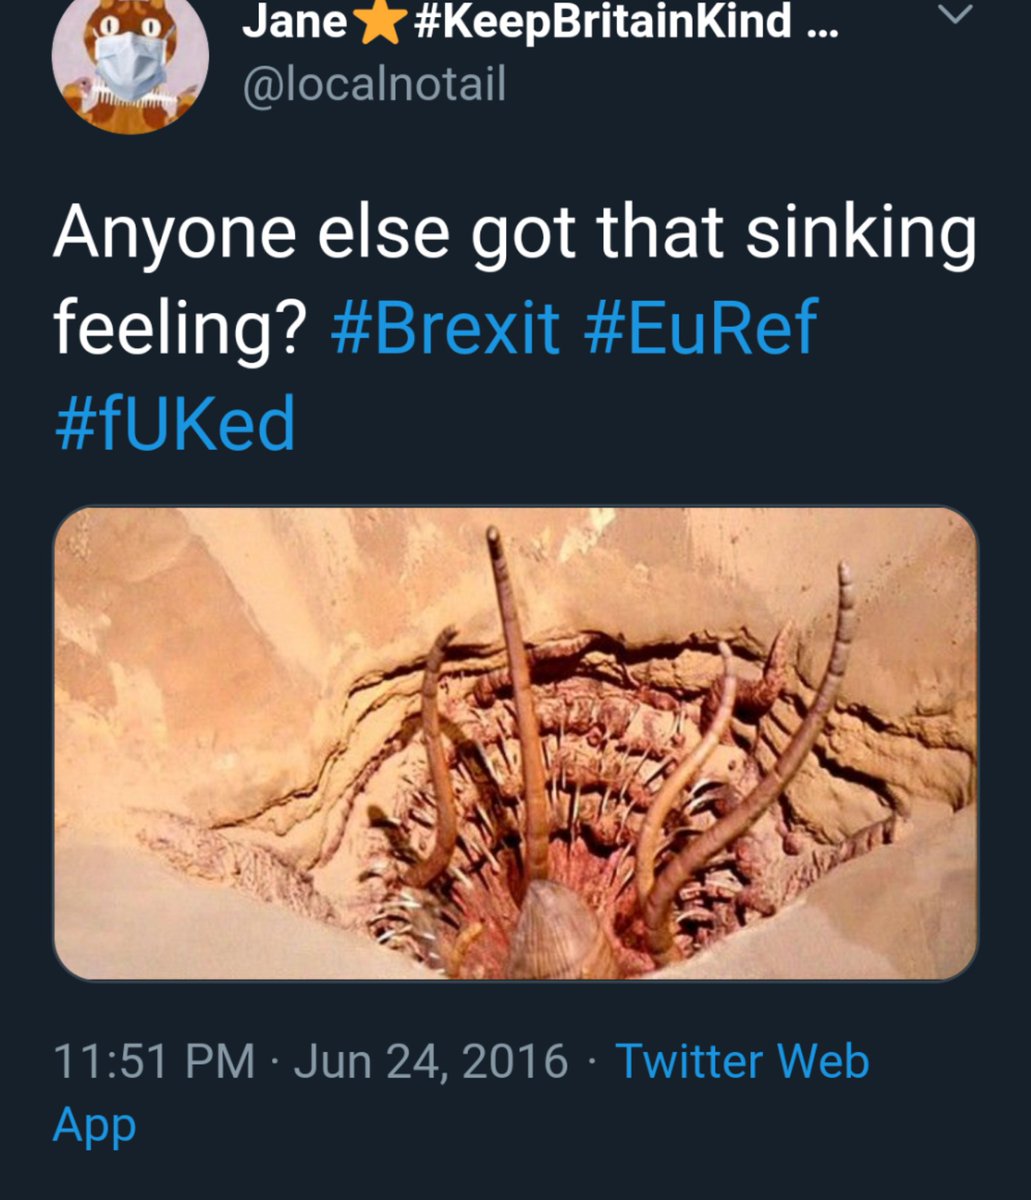 Maybe you'd like to find out what you tweeted on a specific day?Like the day of the EU referendum resultSearch for: "(from:Localnotail) until:2016-06-25 since:2016-06-24" - with your username in not mine. See what you findHere's mine  https://mobile.twitter.com/search?q=%20(from%3ALocalnotail)%20until%3A2016-06-25%20since%3A2016-06-24&src=typed_query